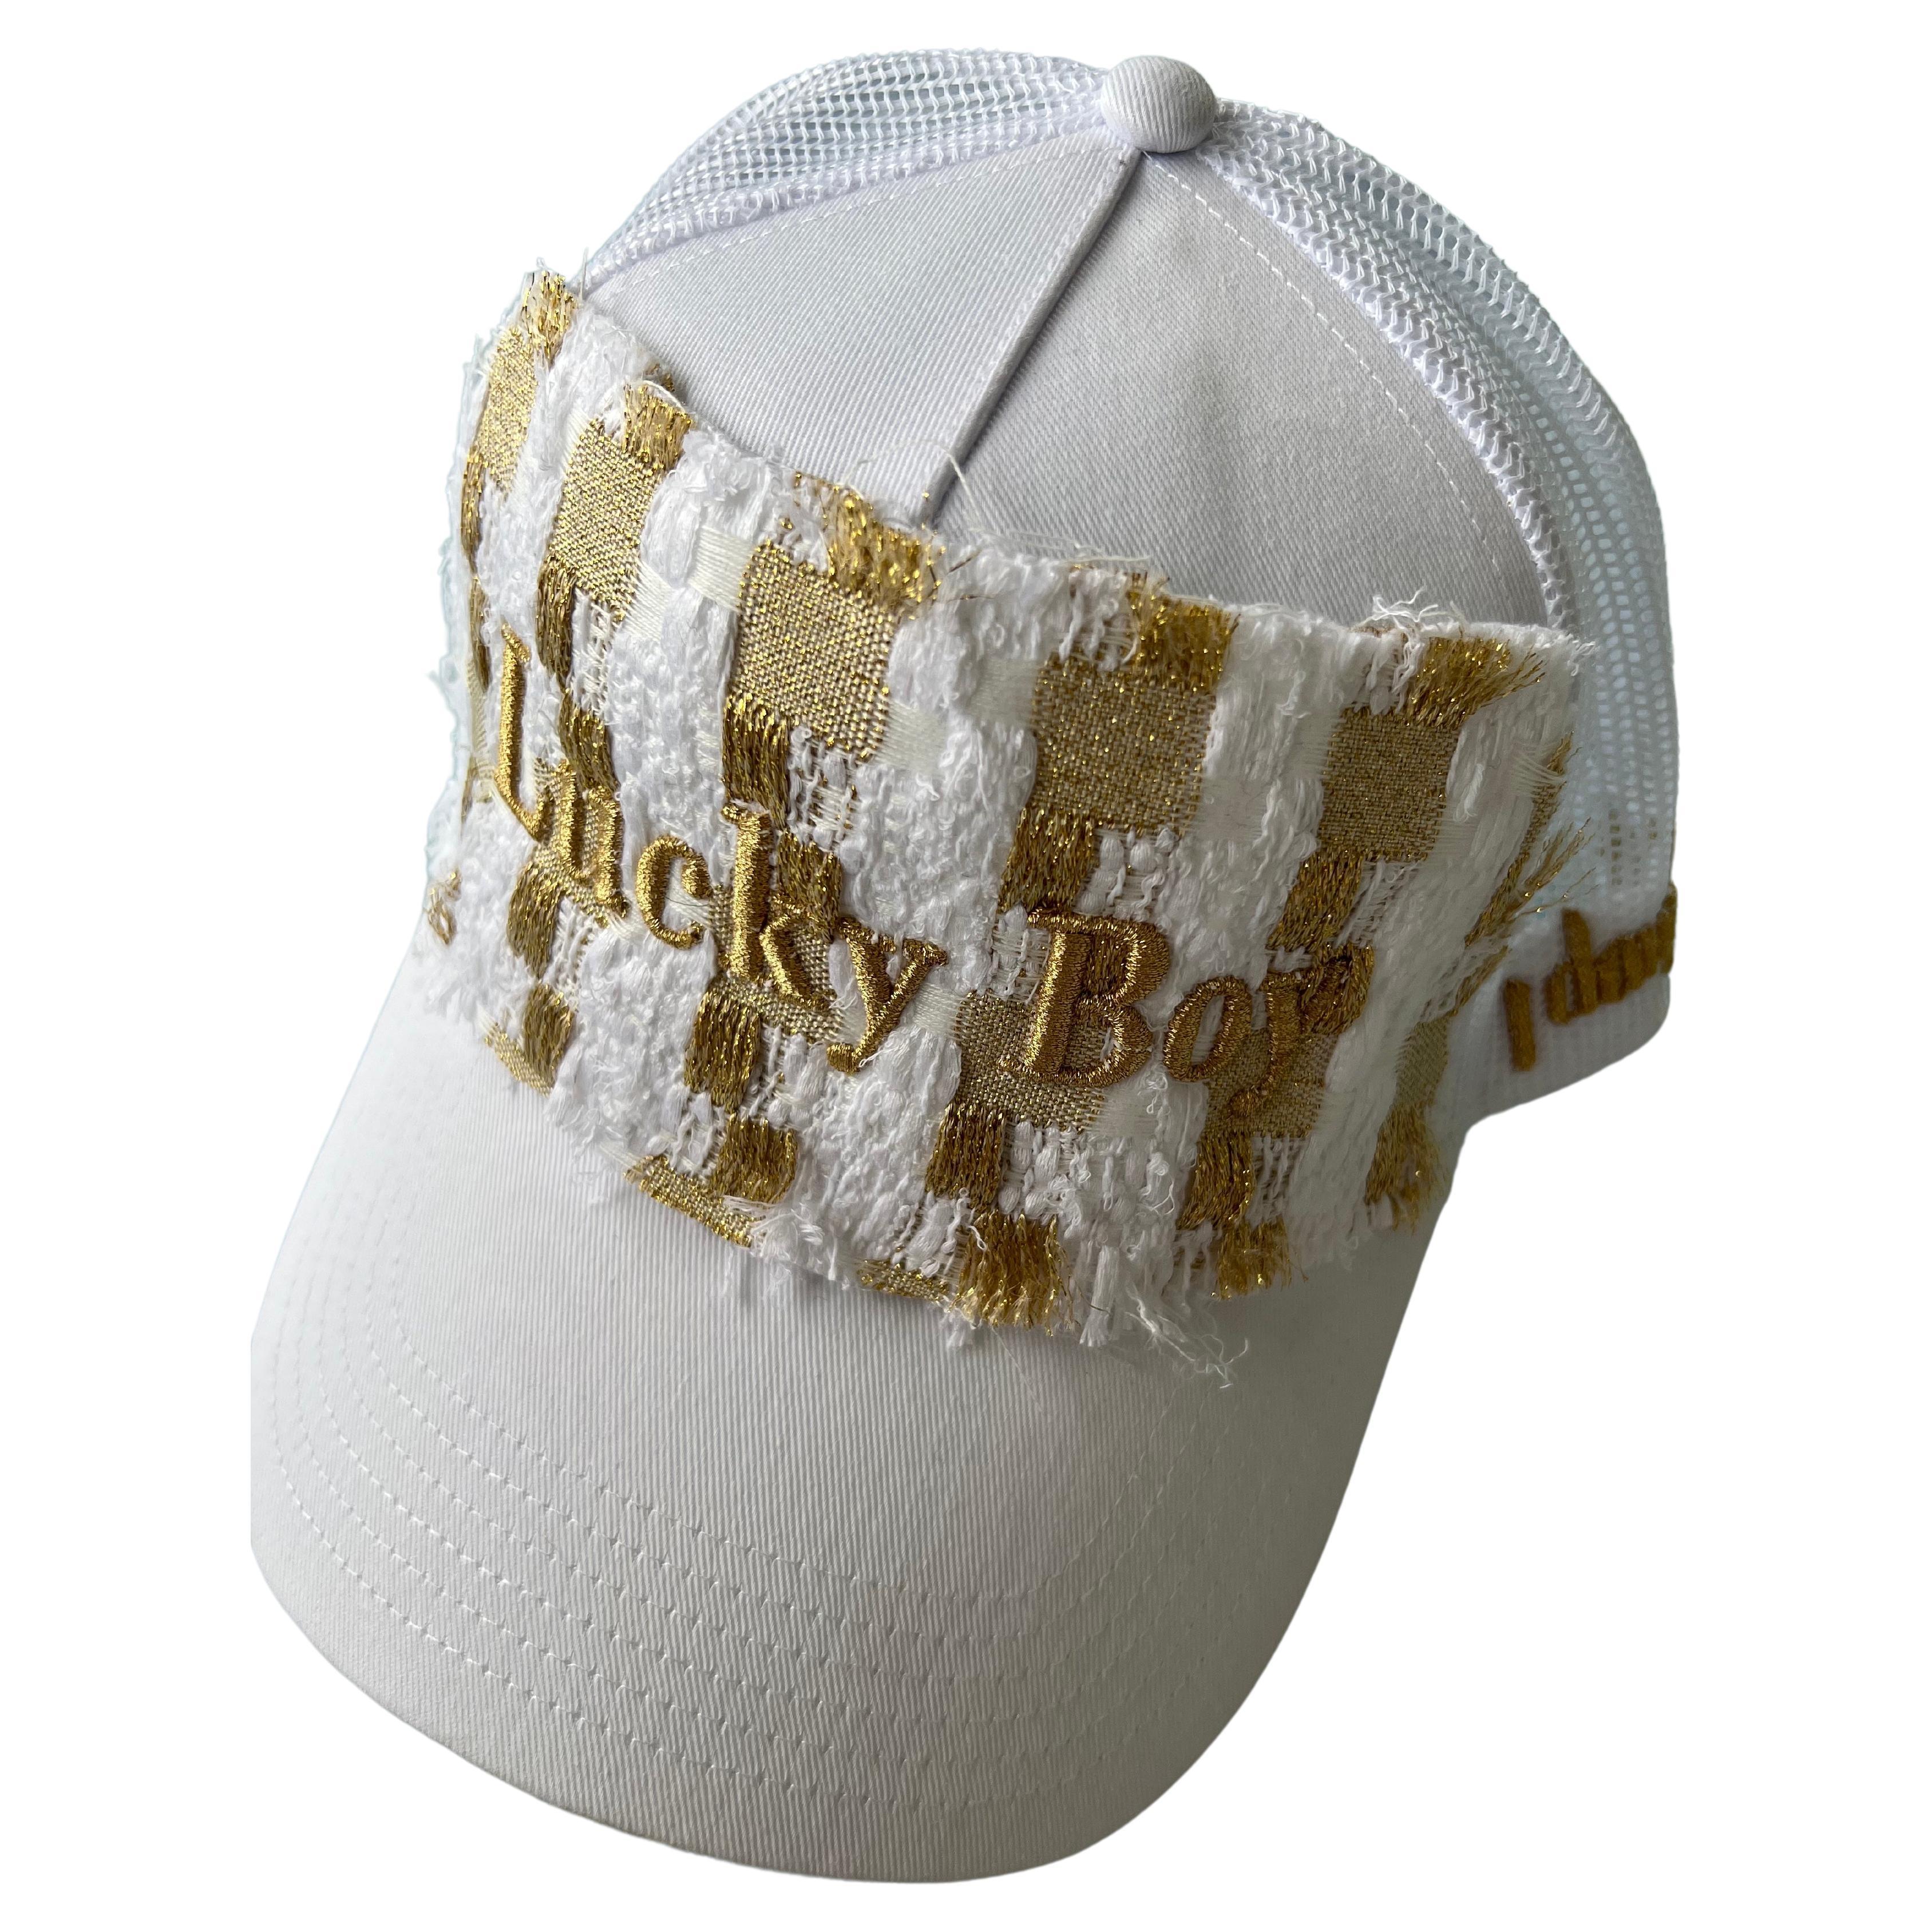 Trucker Hat Cotton French White Tweed Gold Text Lucky Boy J Dauphin